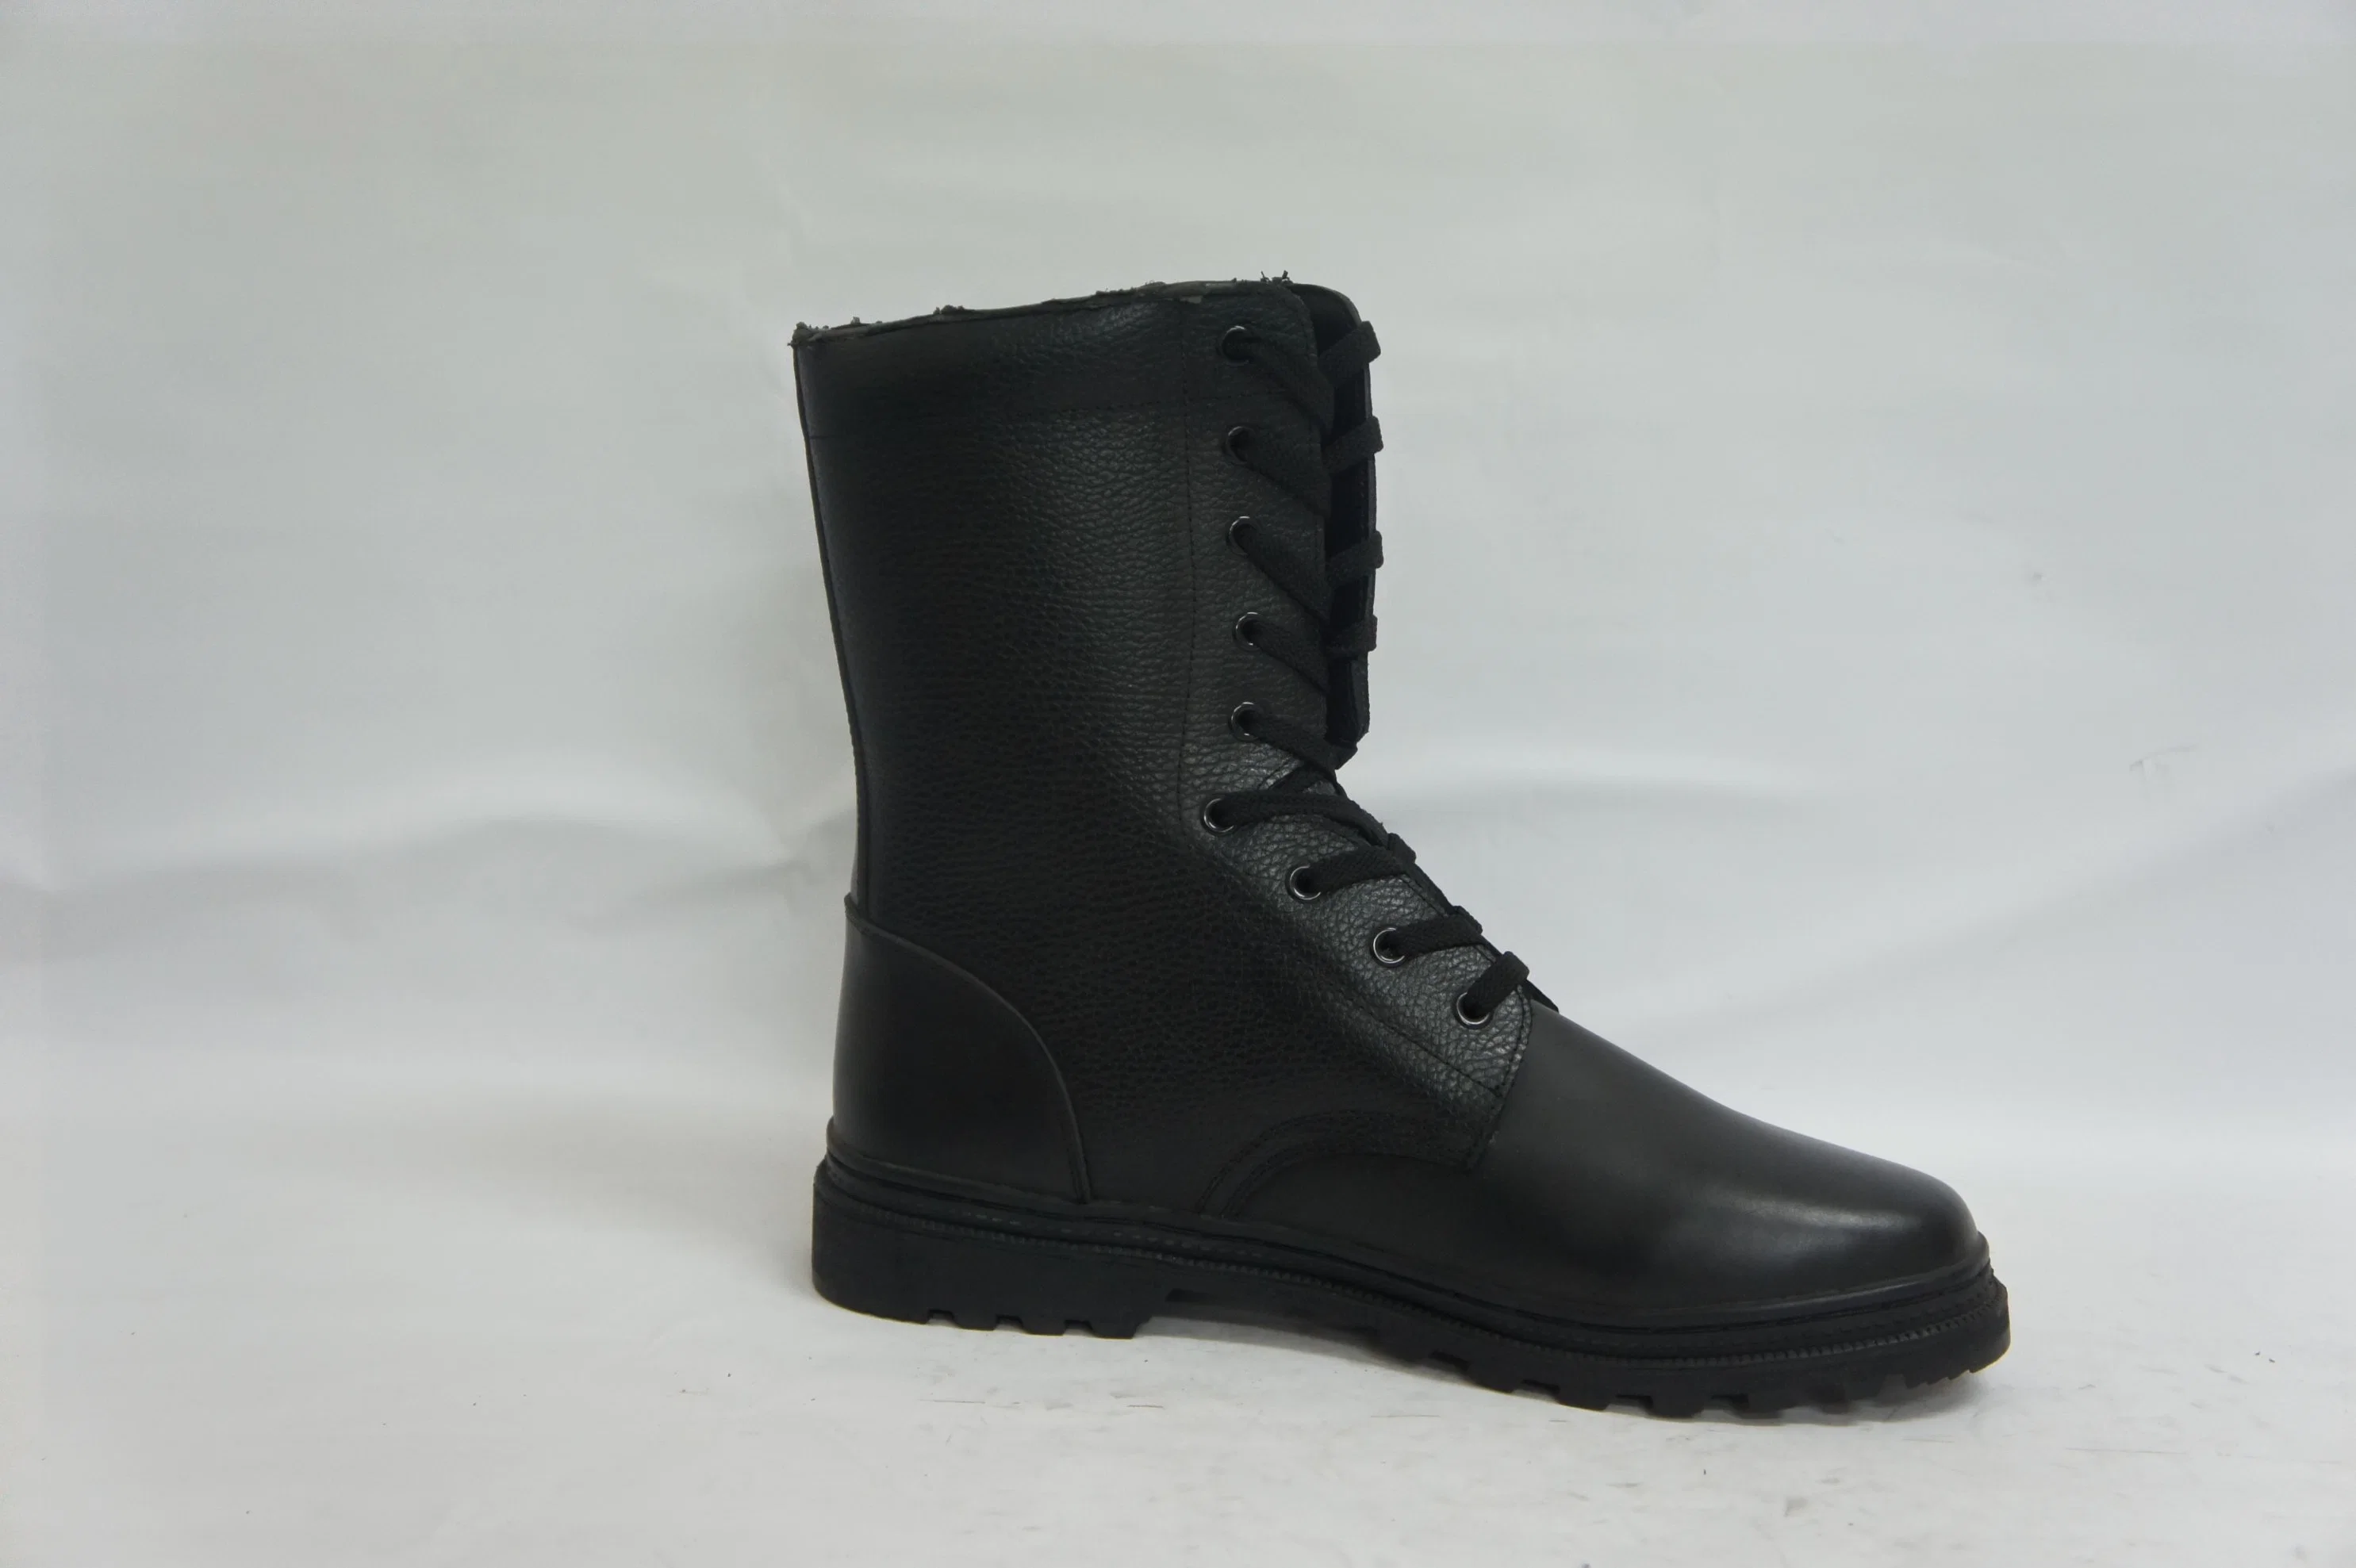 New Cheap Black Combat Boots Military Style